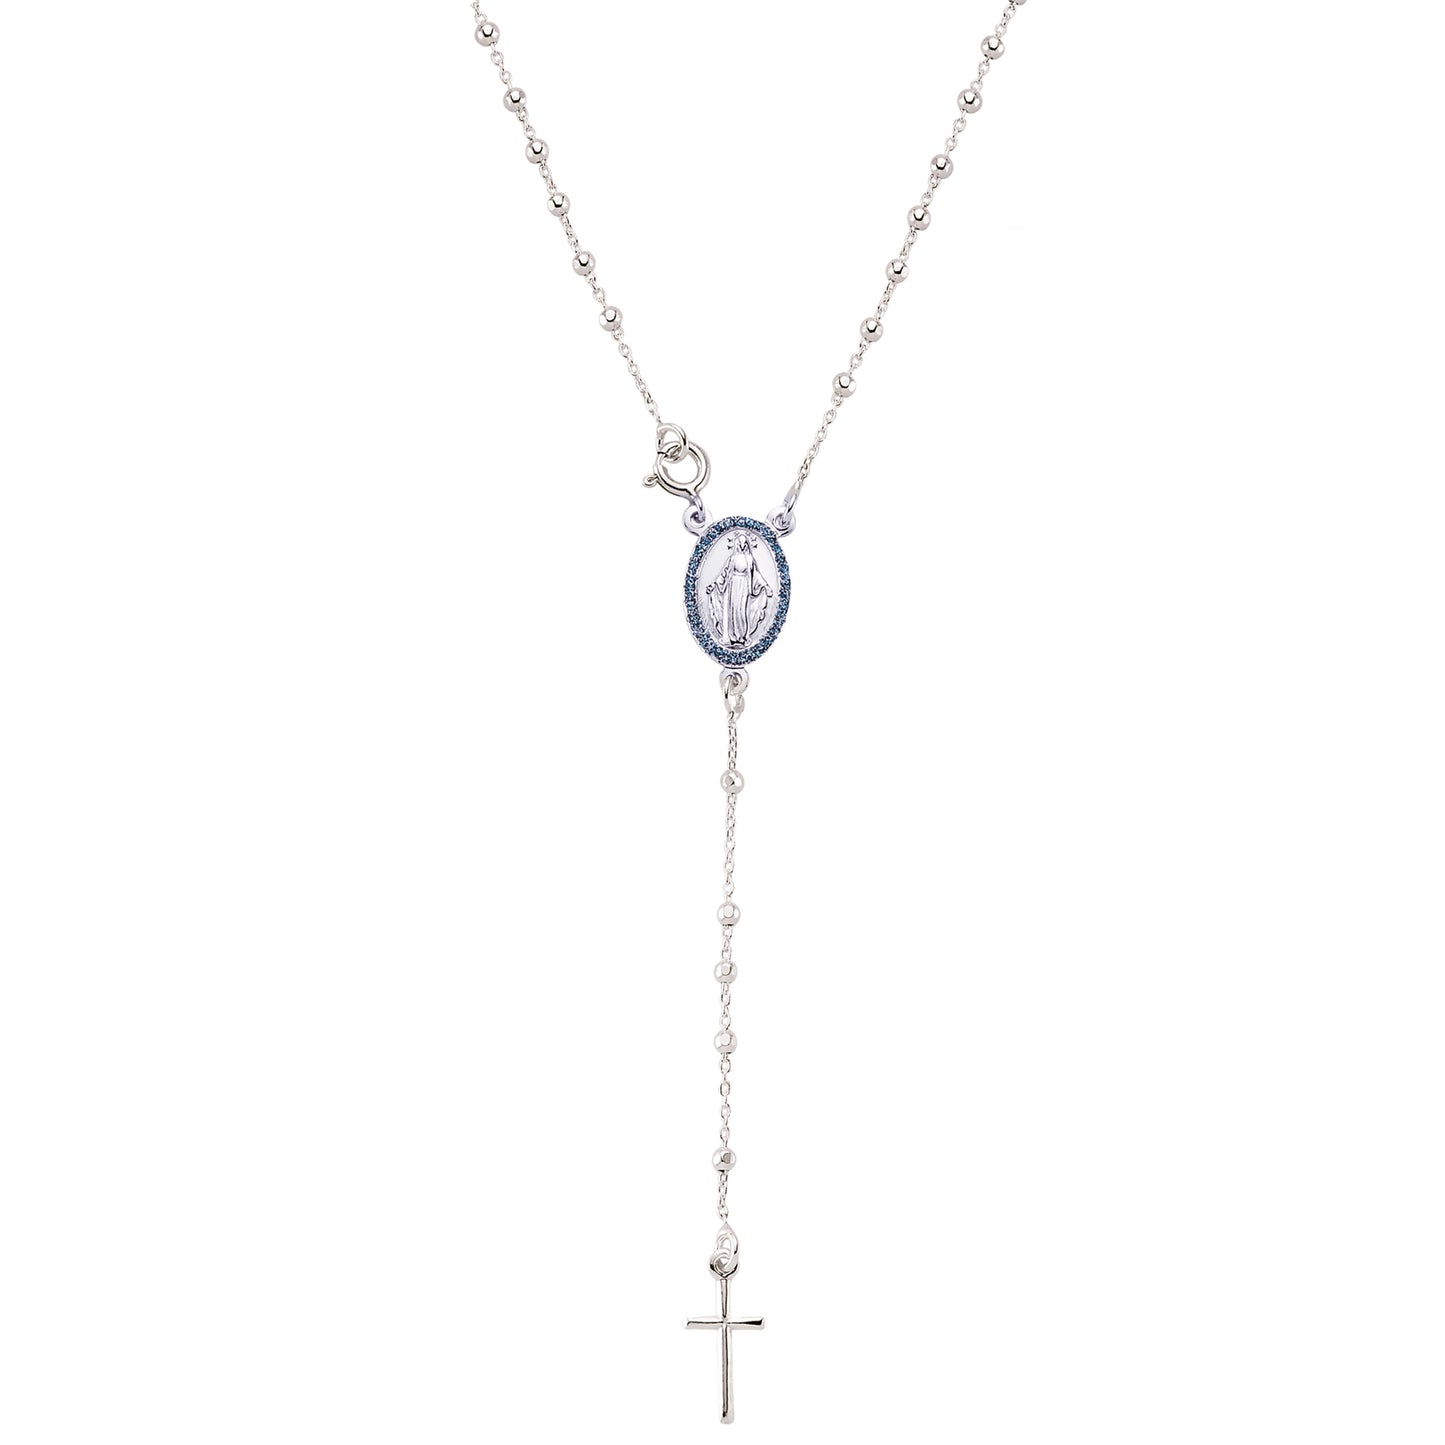 Anti-Tarnish Sterling Silver  Blue CZ Rosary beads Necklace - GVK085